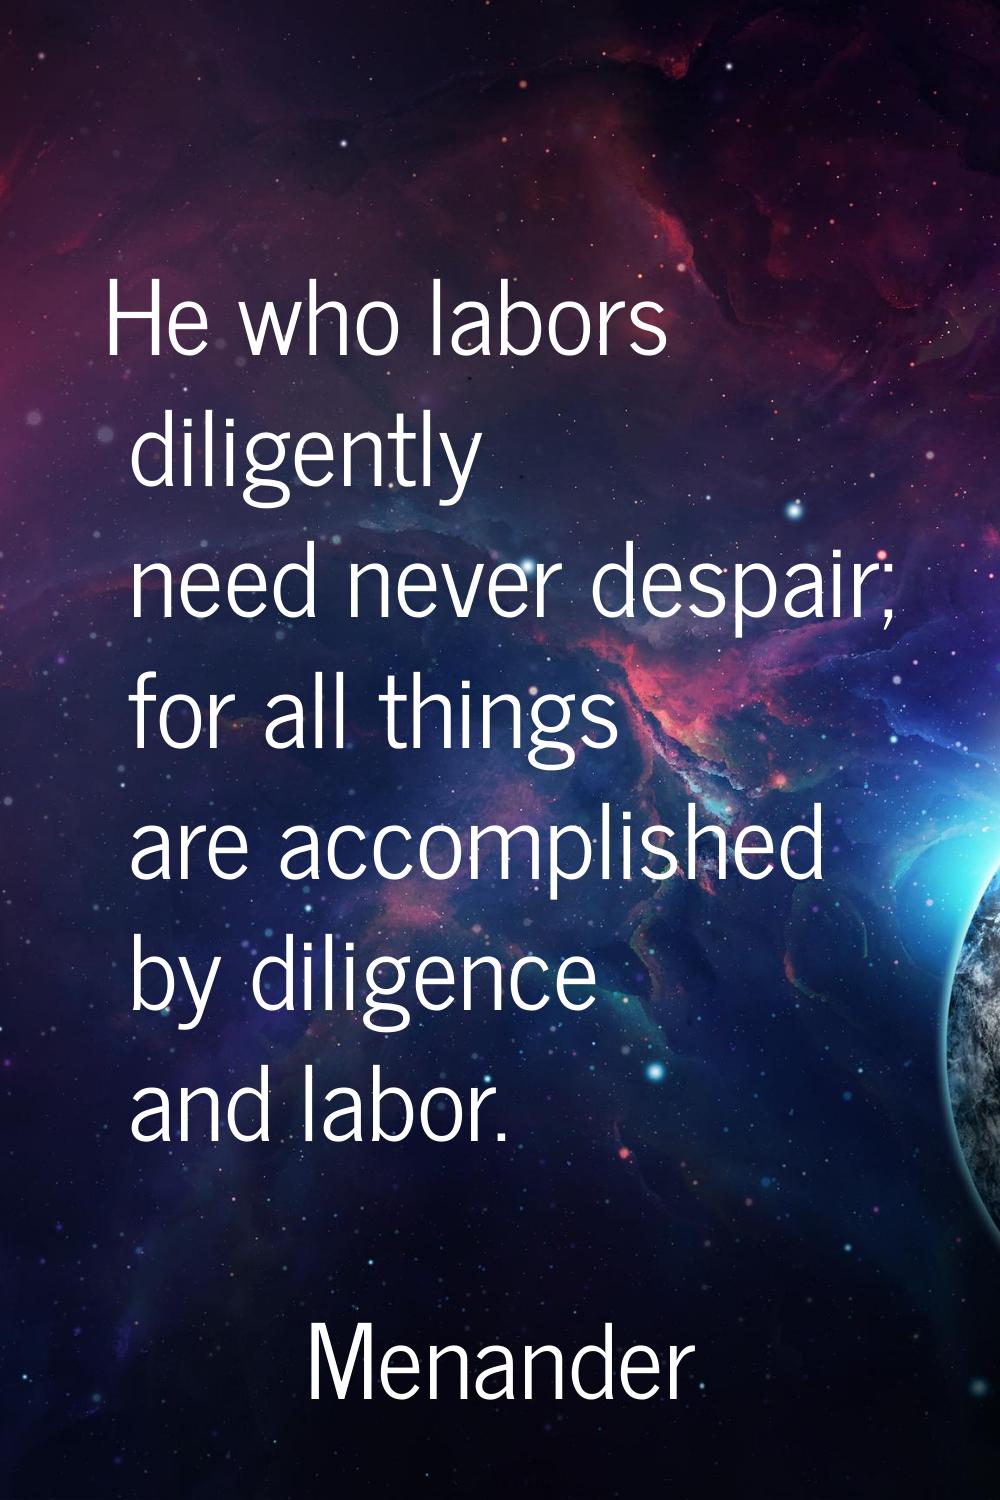 He who labors diligently need never despair; for all things are accomplished by diligence and labor